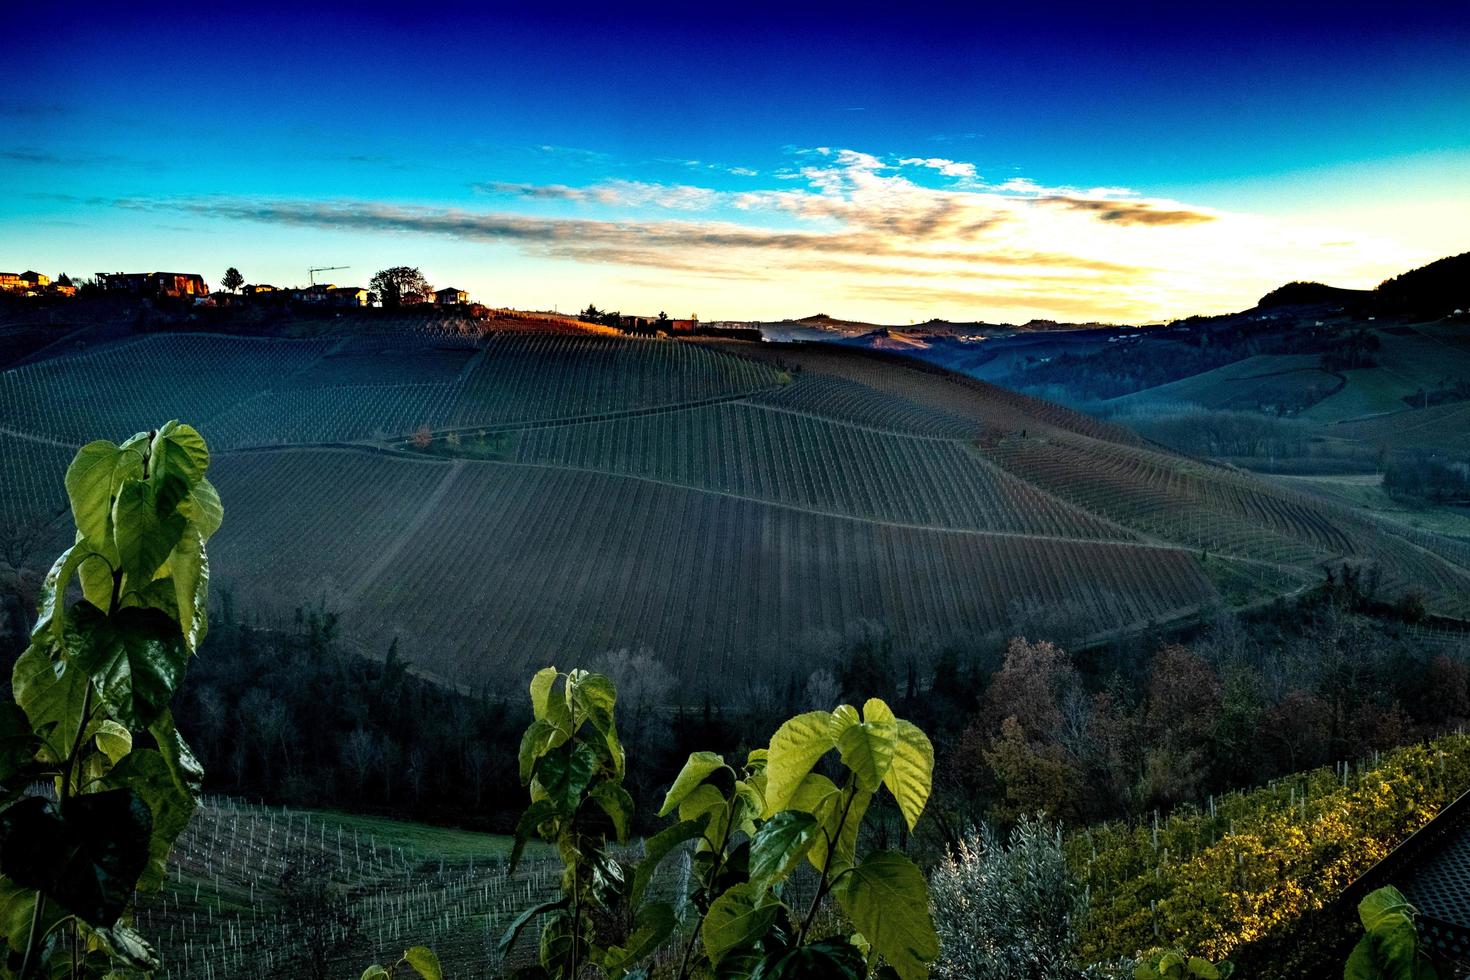 landscapes of the Piedmontese Langhe the vineyards the vivid colors of autumn near Alba photo